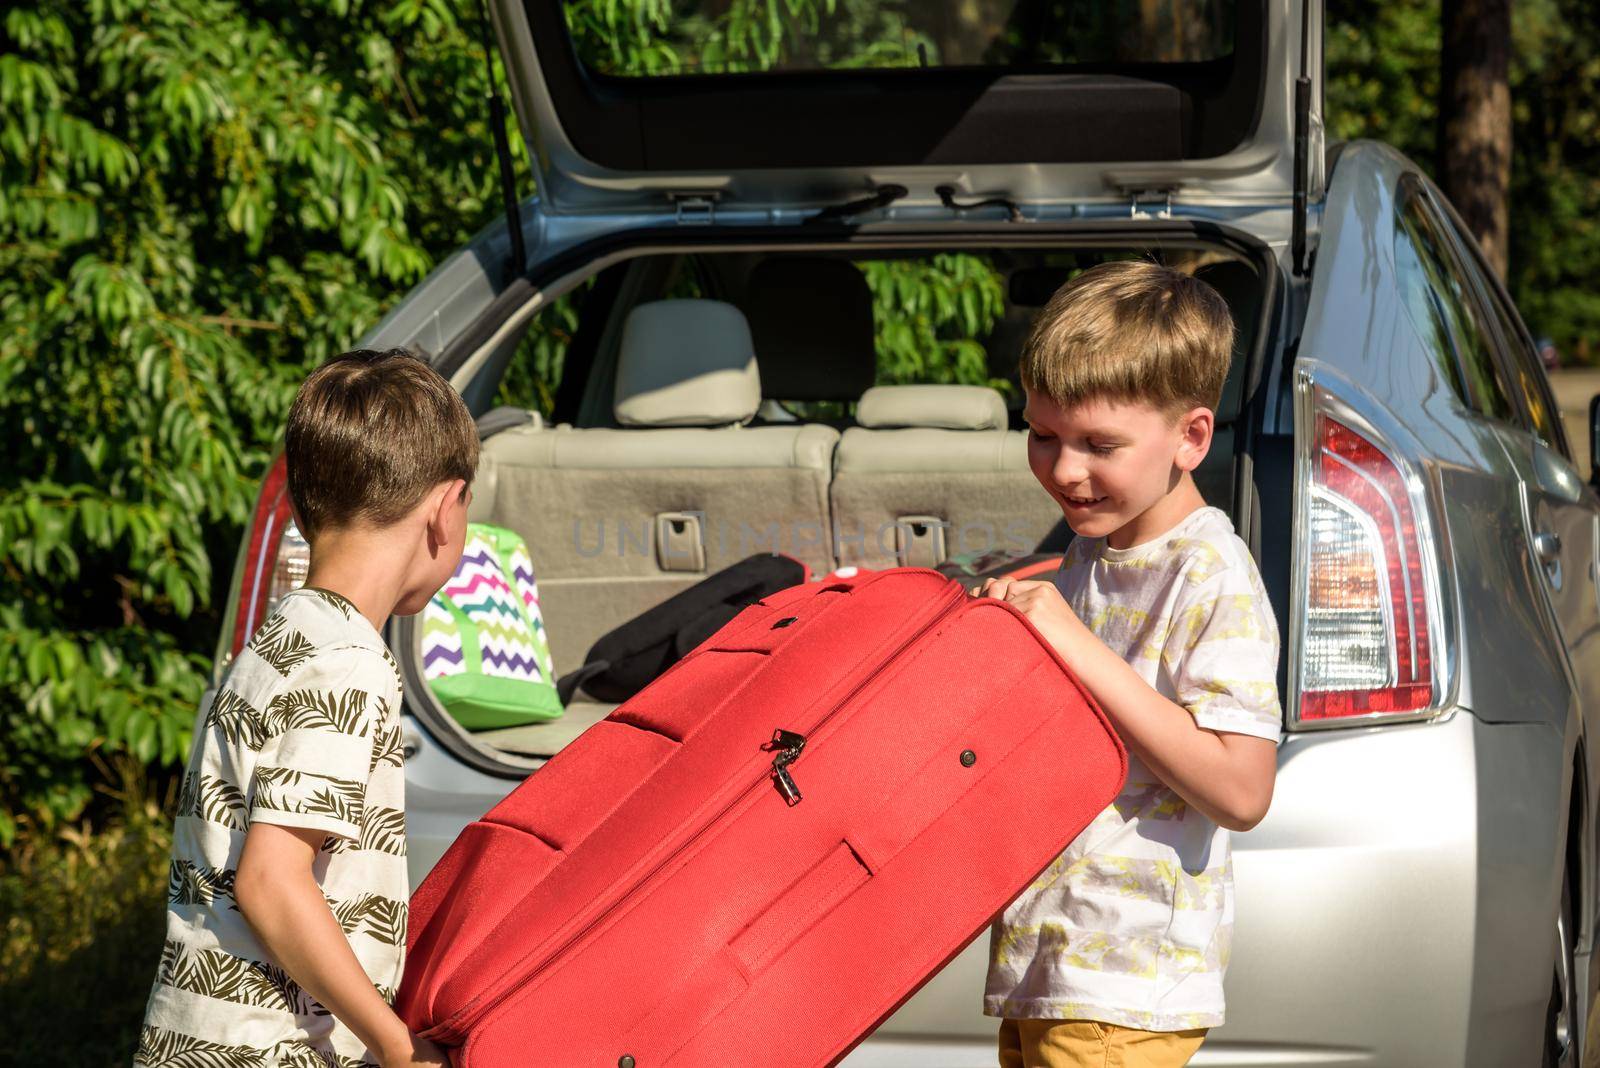 Two adorable boys holding a suitcase going on vacations with their parents. Two kids looking forward for a road trip or travel. Family travel by car by Kobysh